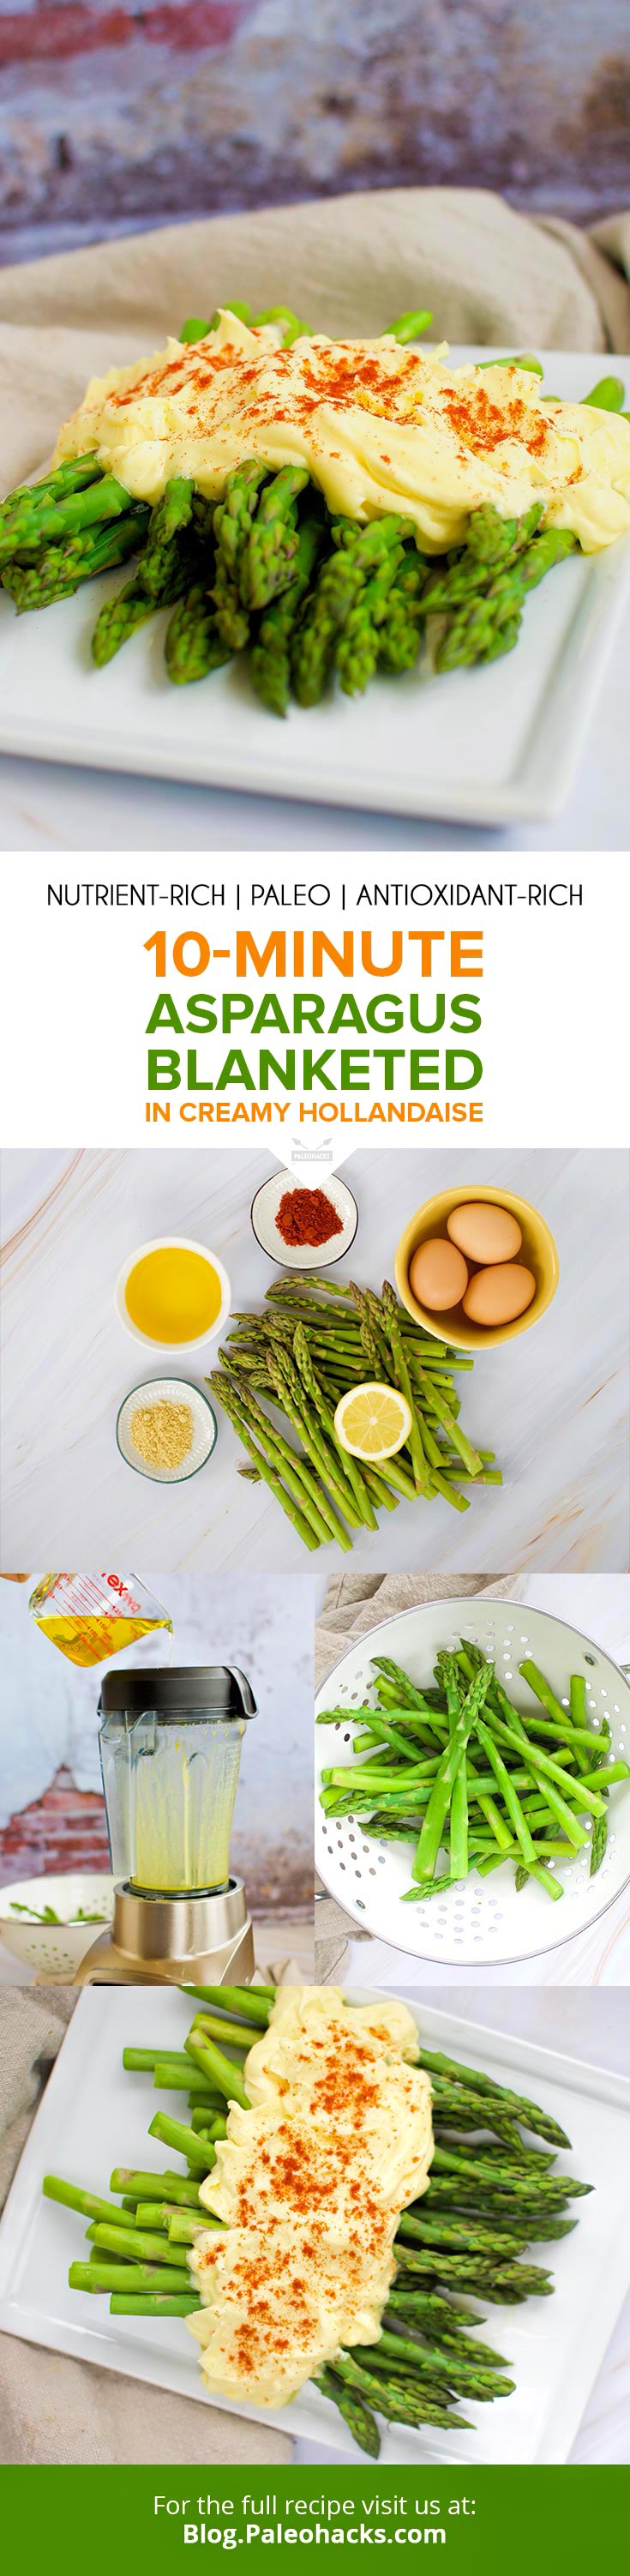 Blanch some asparagus and blend up your favorite brunchy sauce in this 10-minute recipe. Skip the whisk and make your hollandaise in a blender.